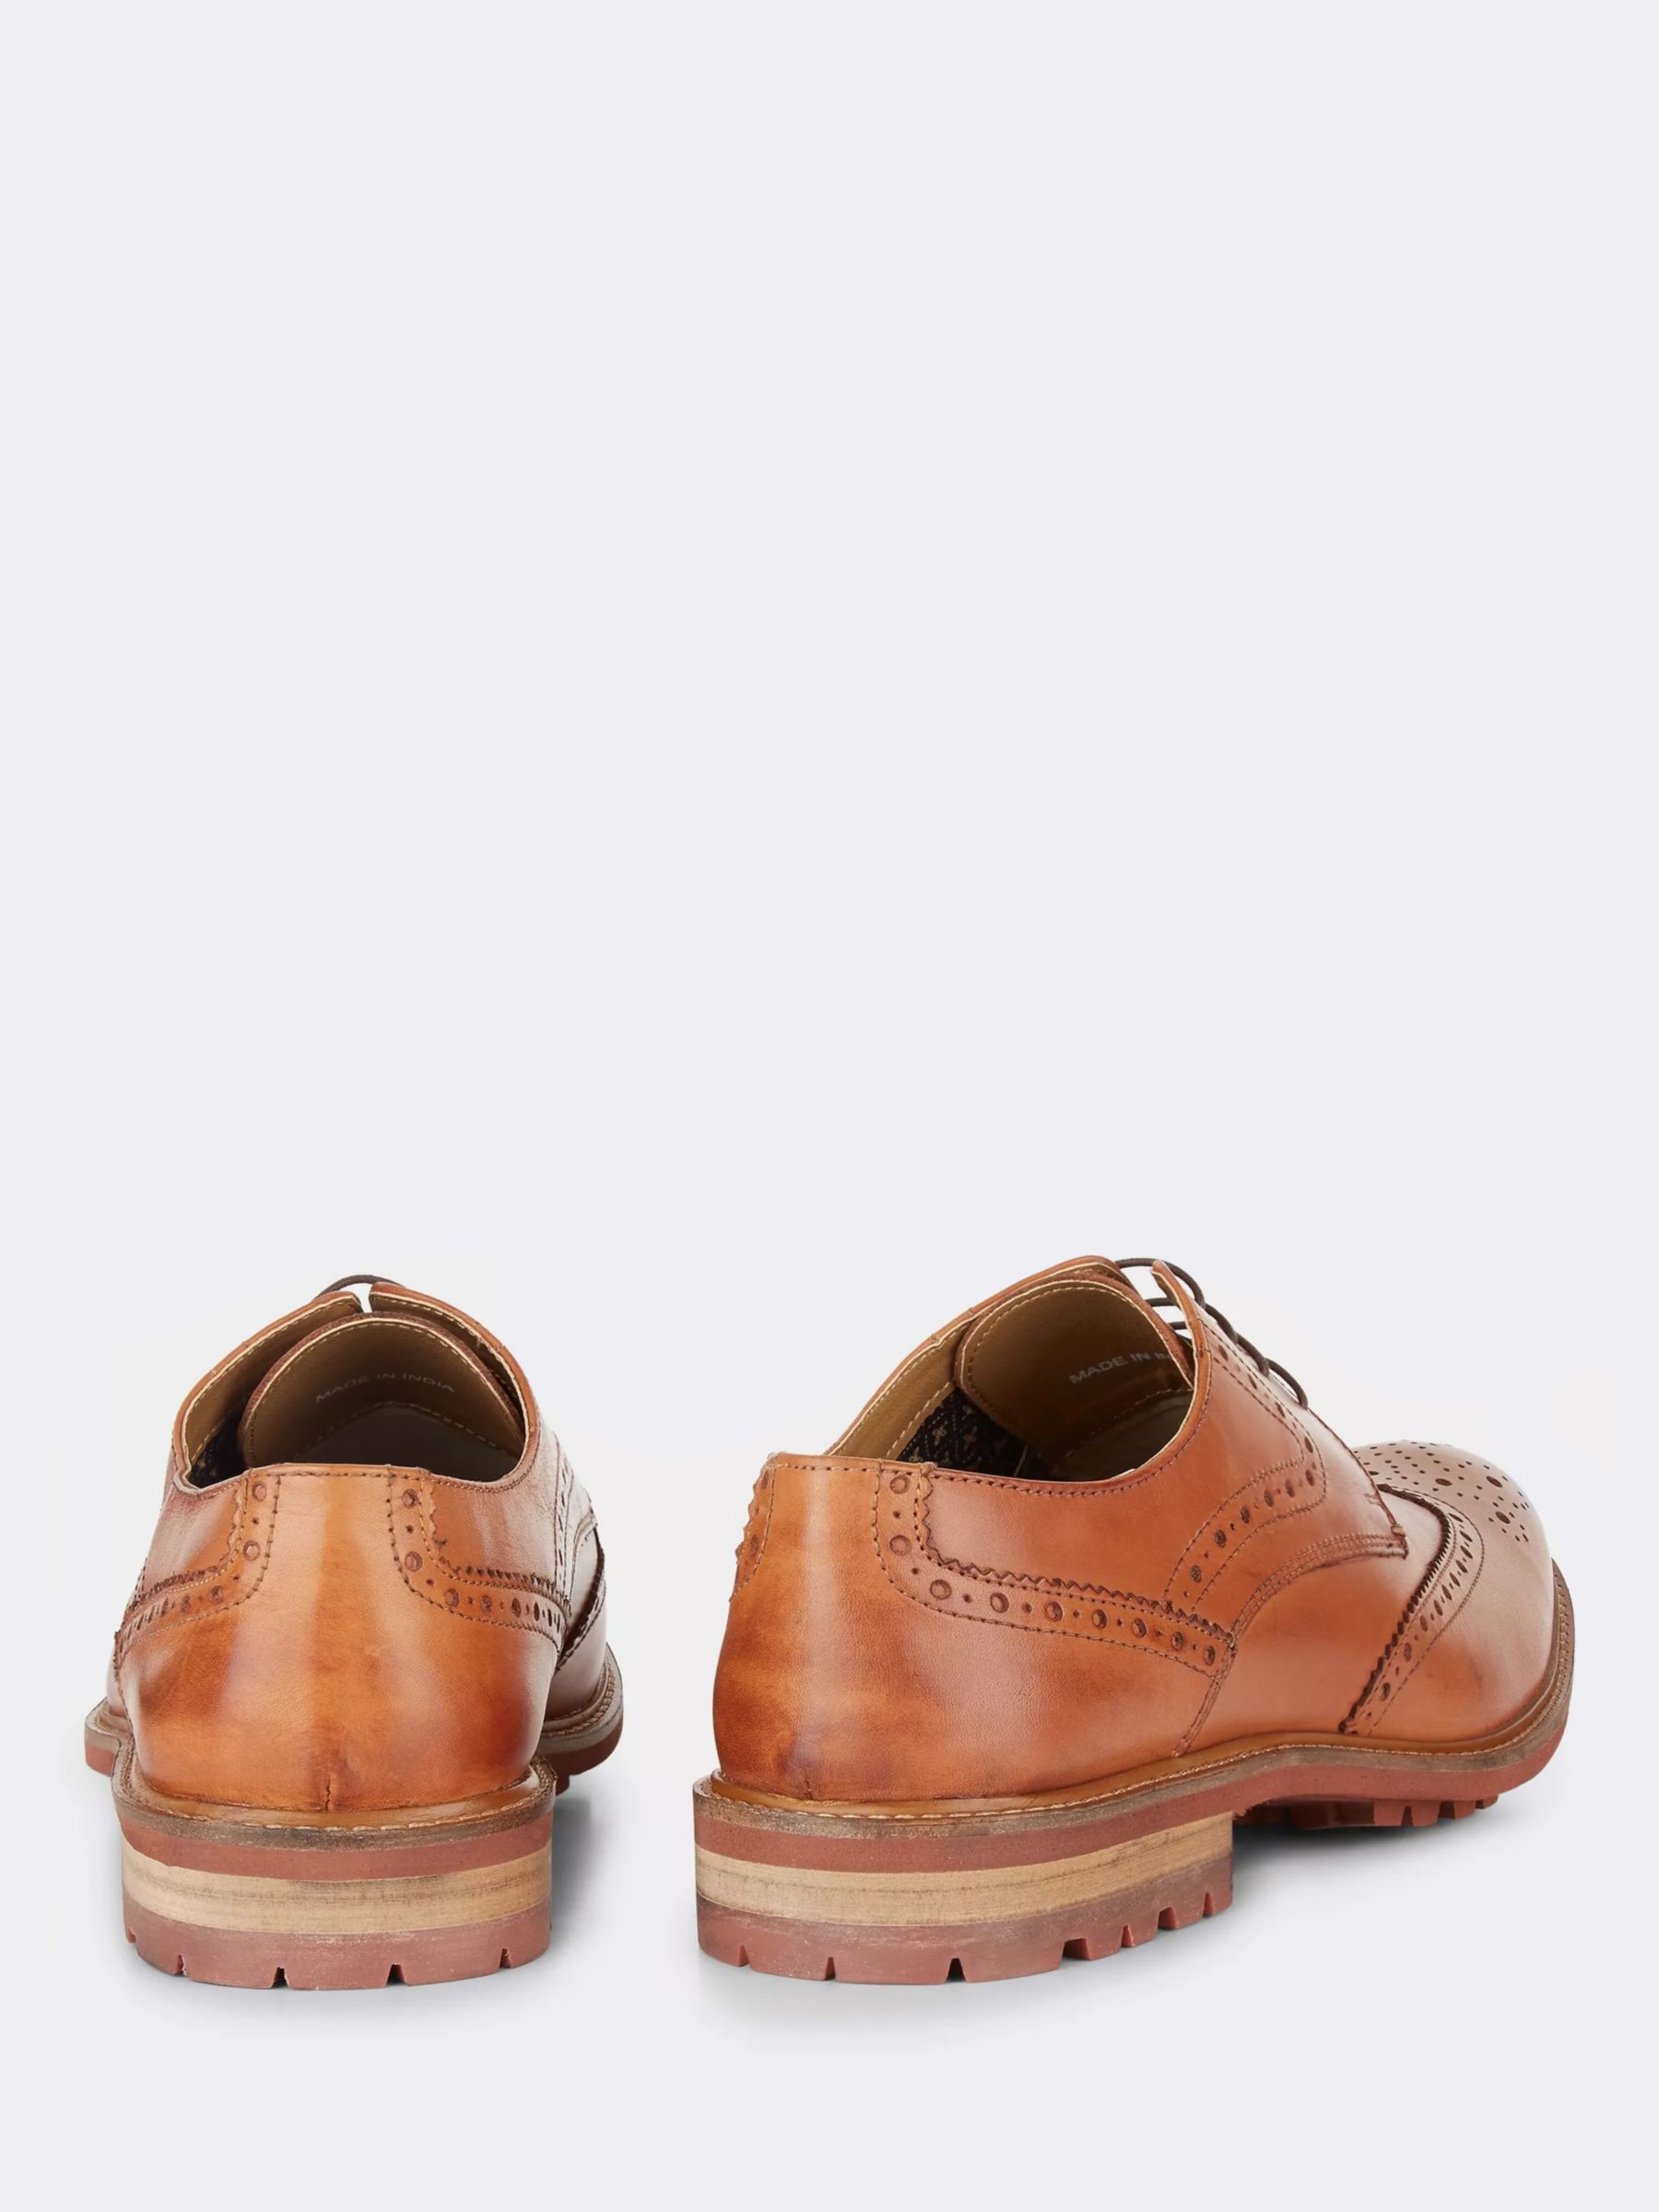 Moss Bray Leather Brogues, Tan, 6